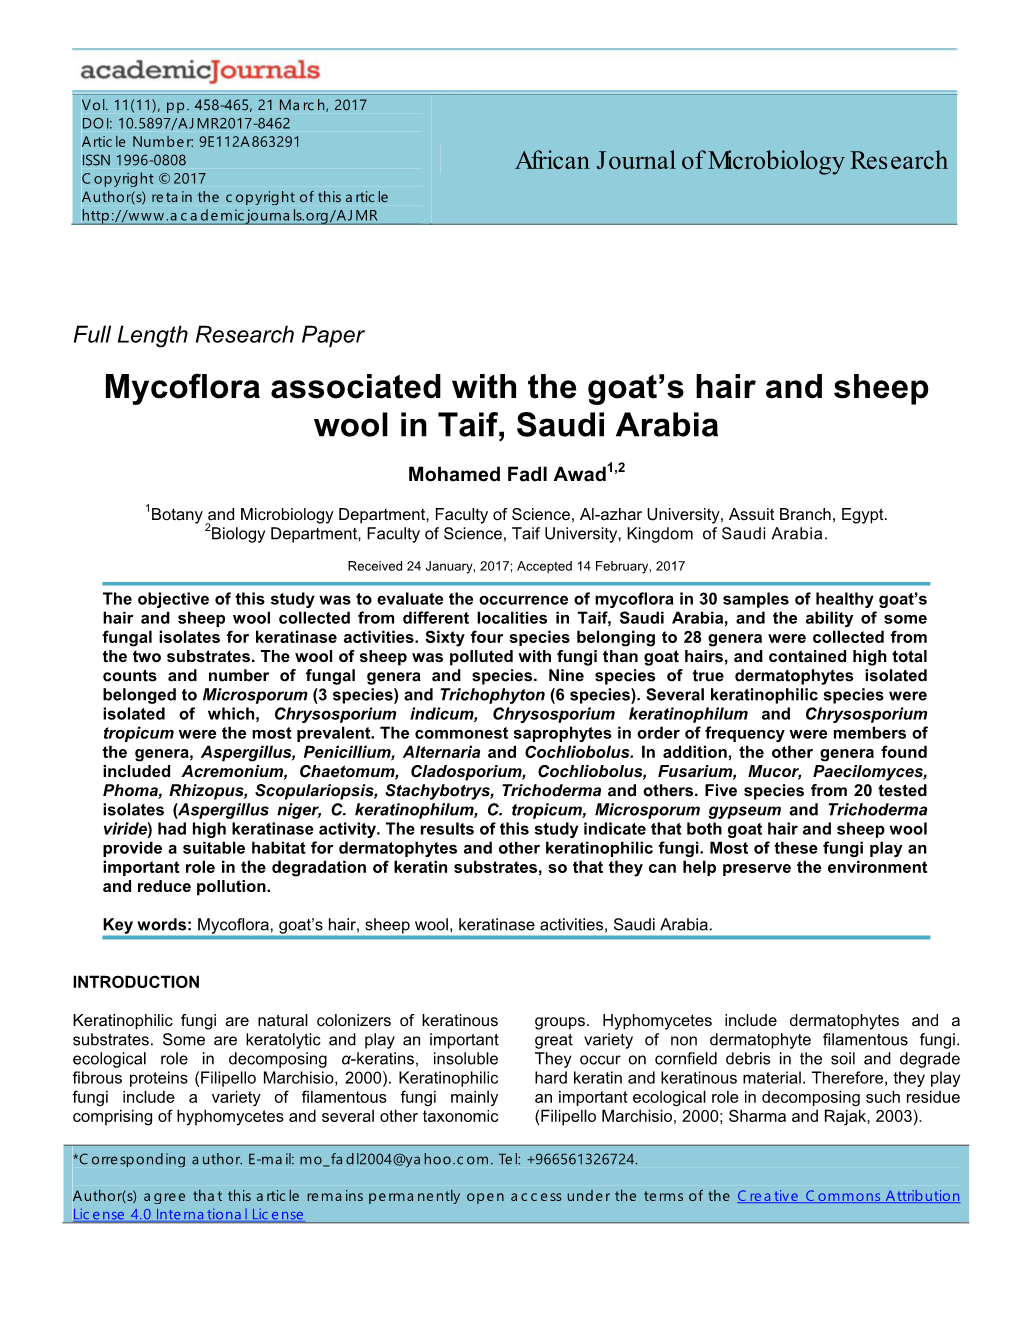 Mycoflora Associated with the Goat's Hair and Sheep Wool in Taif, Saudi